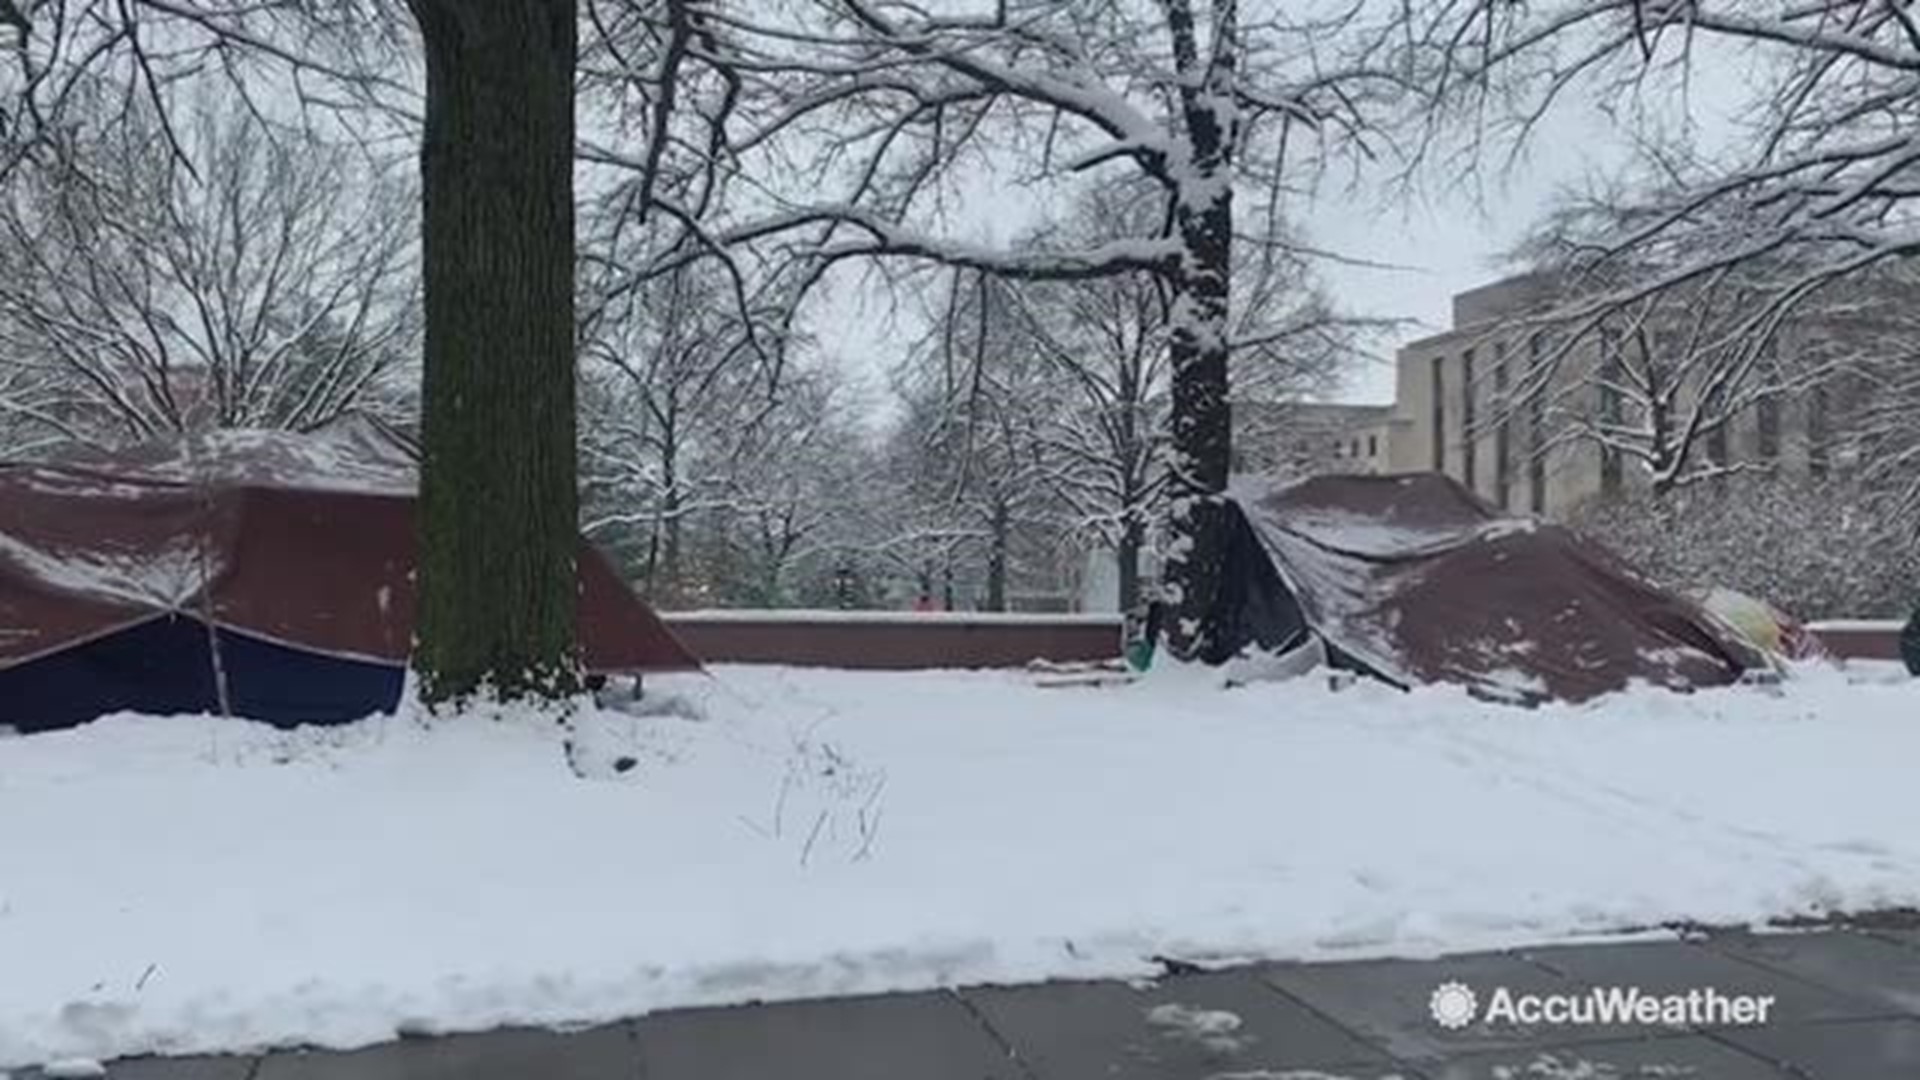 This homeless tent camp in Washington, DC has been buried by snow from the winter storm on Jan. 13.